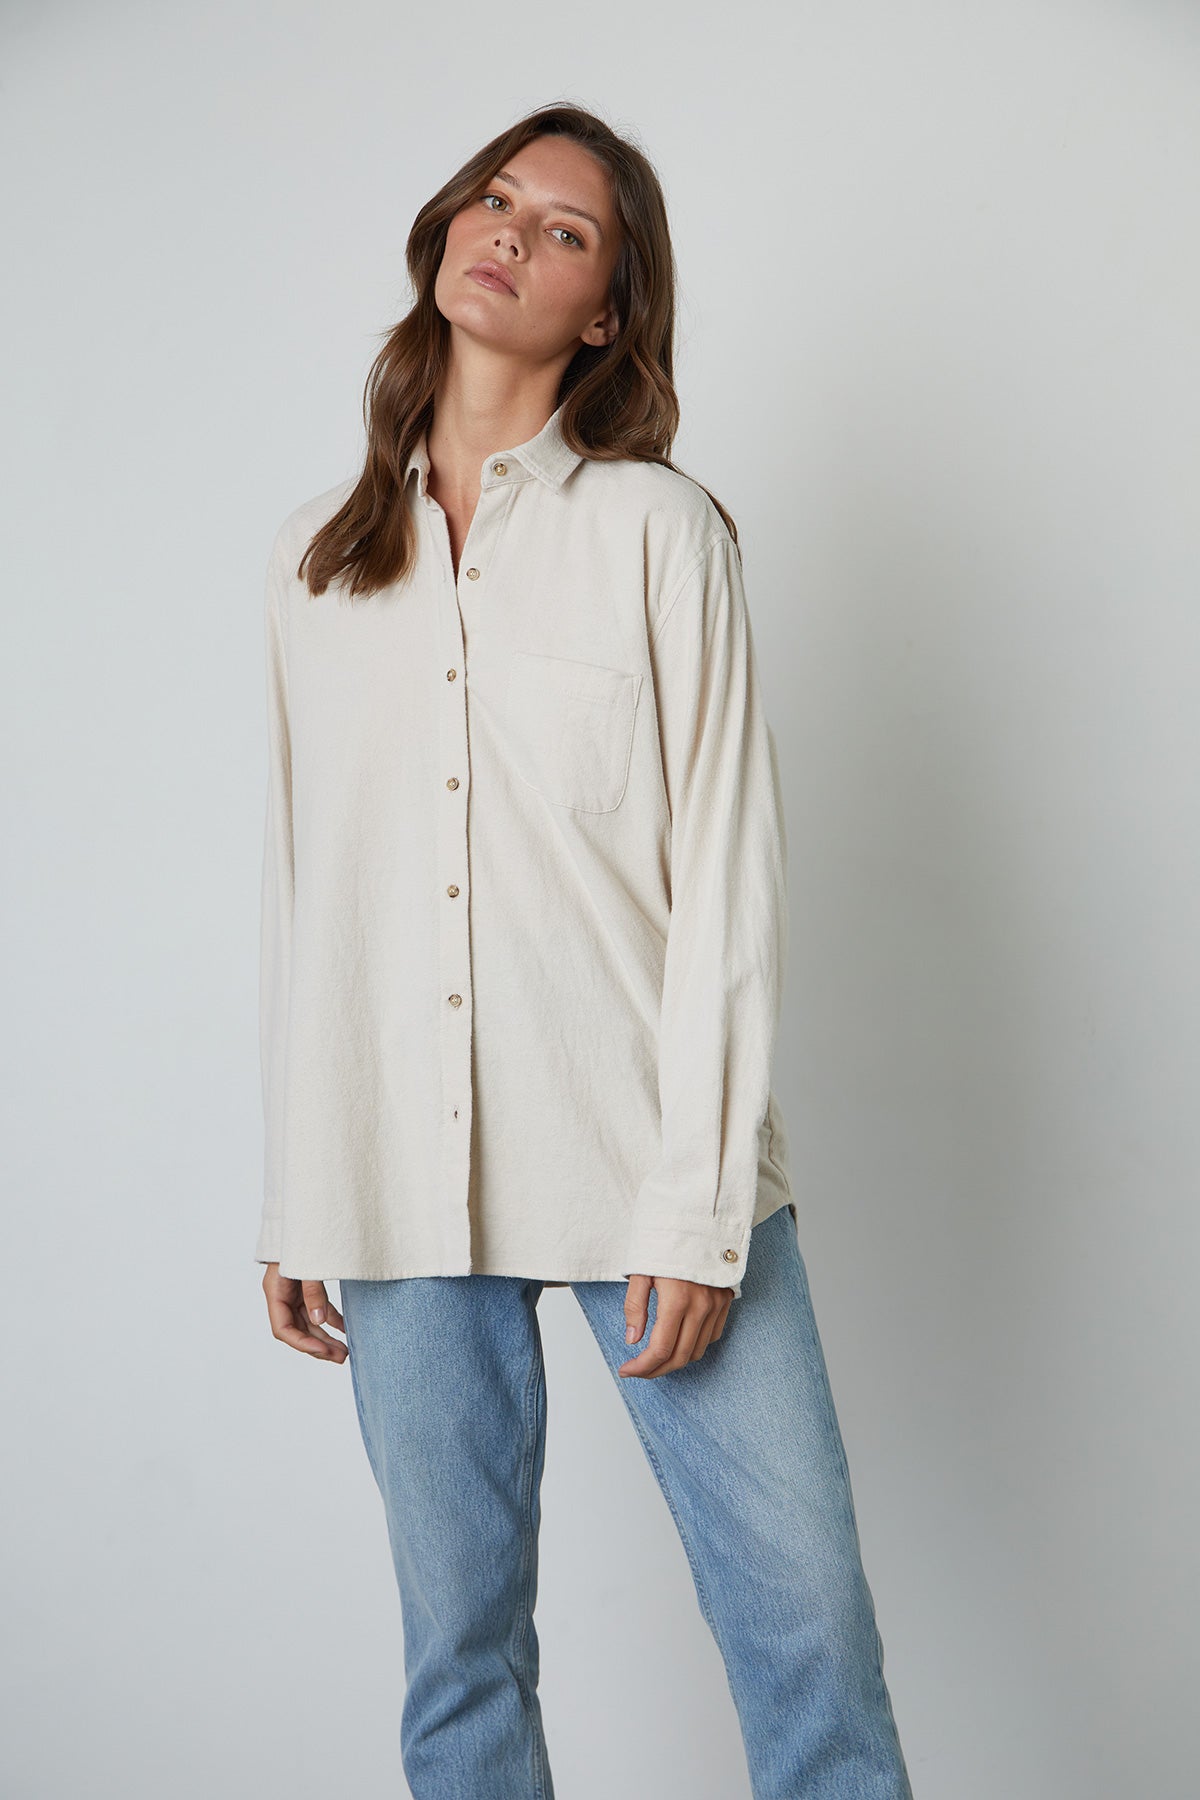 Chelsey Button-Up Shirt in cream colored flannel front-25053019799745